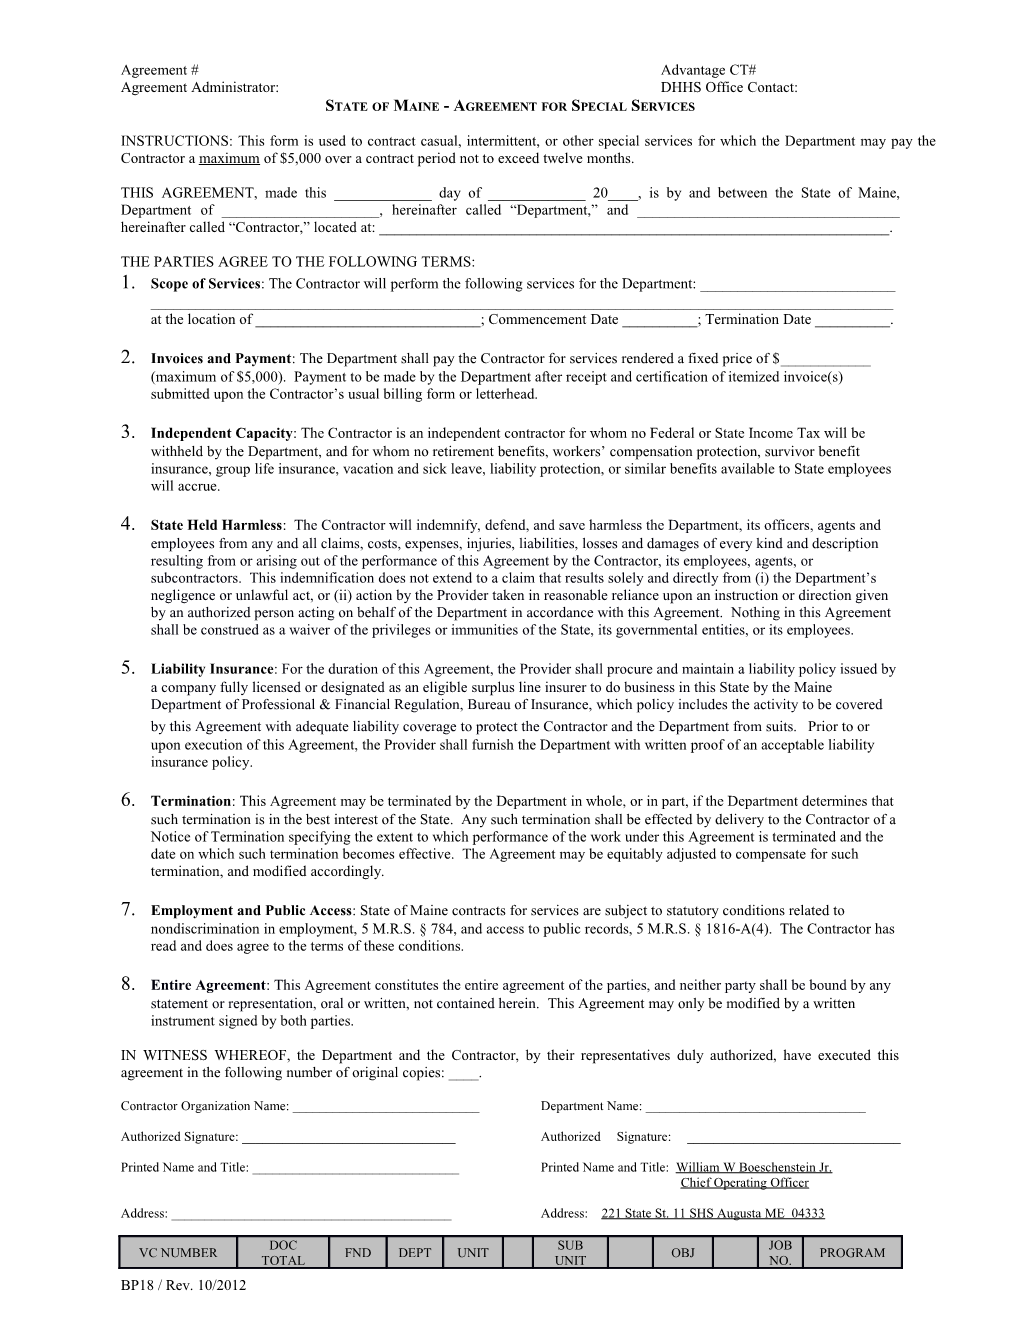 This Form Is Used for Contracting Casual, Intermittent Or Other Special Services for Which